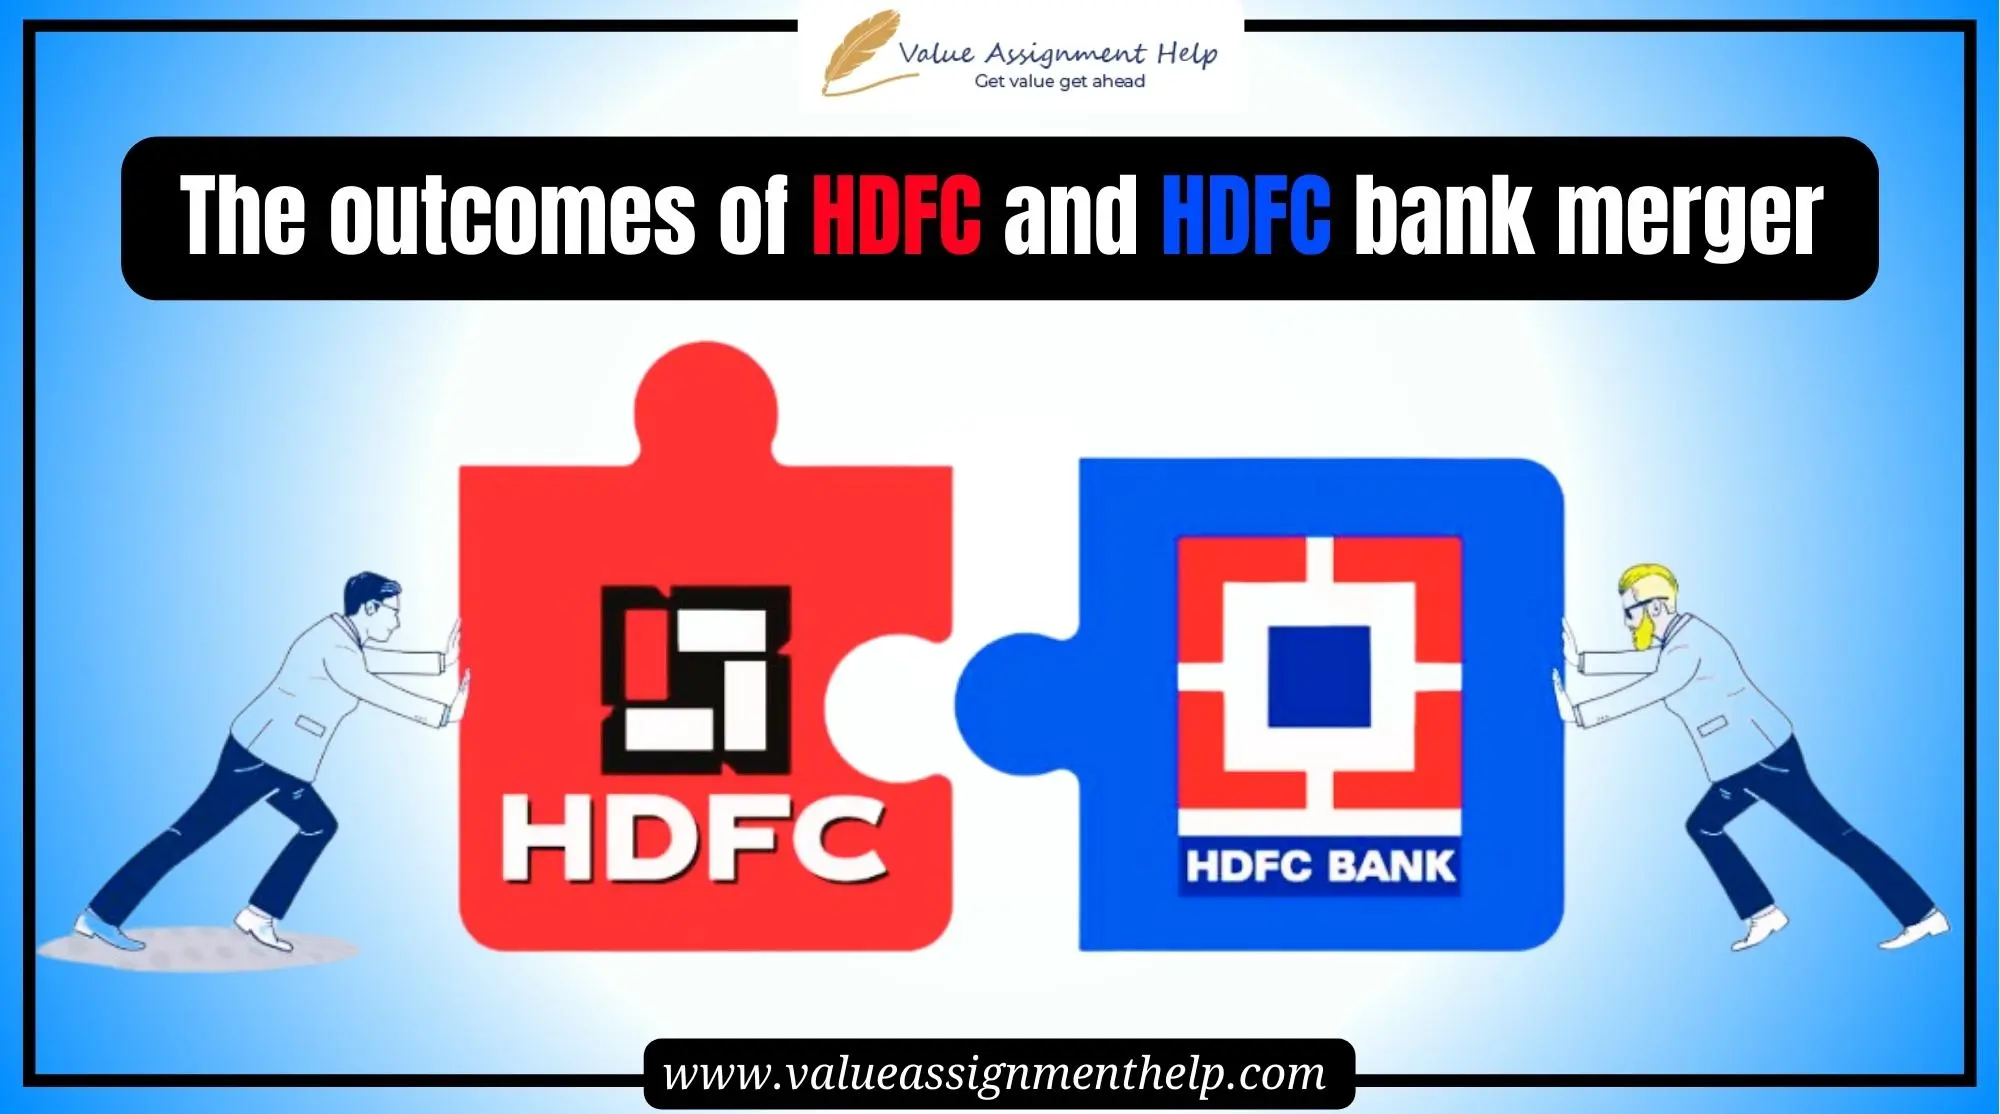  The outcomes of the HDFC and HDFC Bank merger